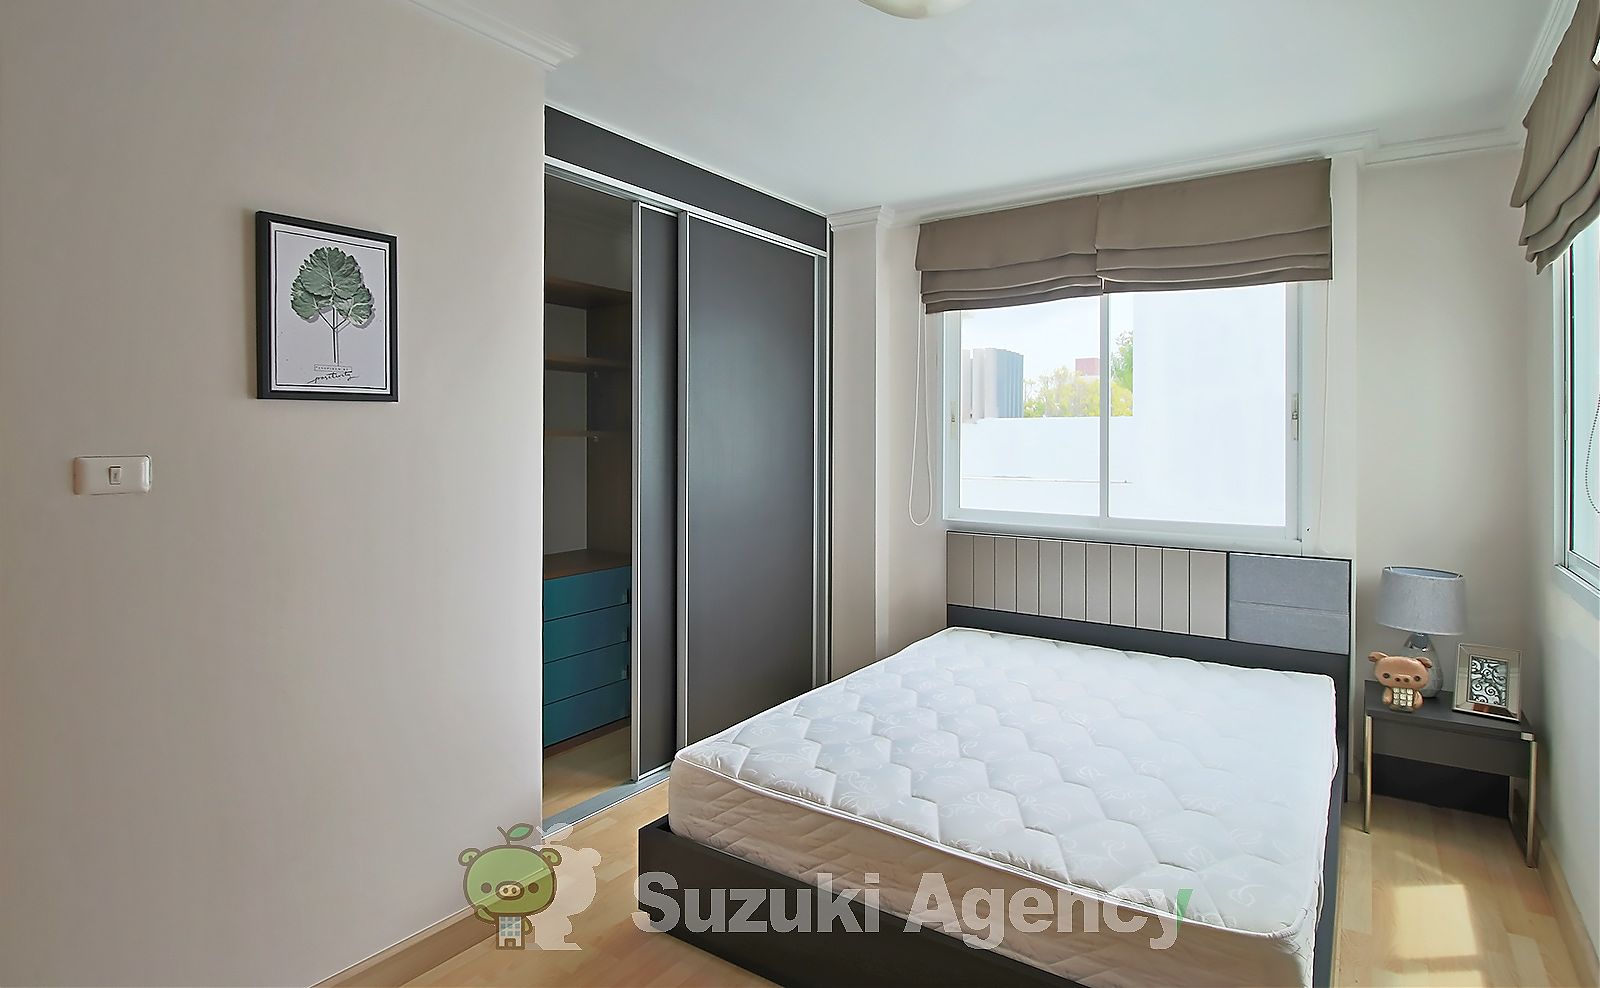 Pacific Residence （旧 Bexley Mansion):3Bed Room Photos No.10